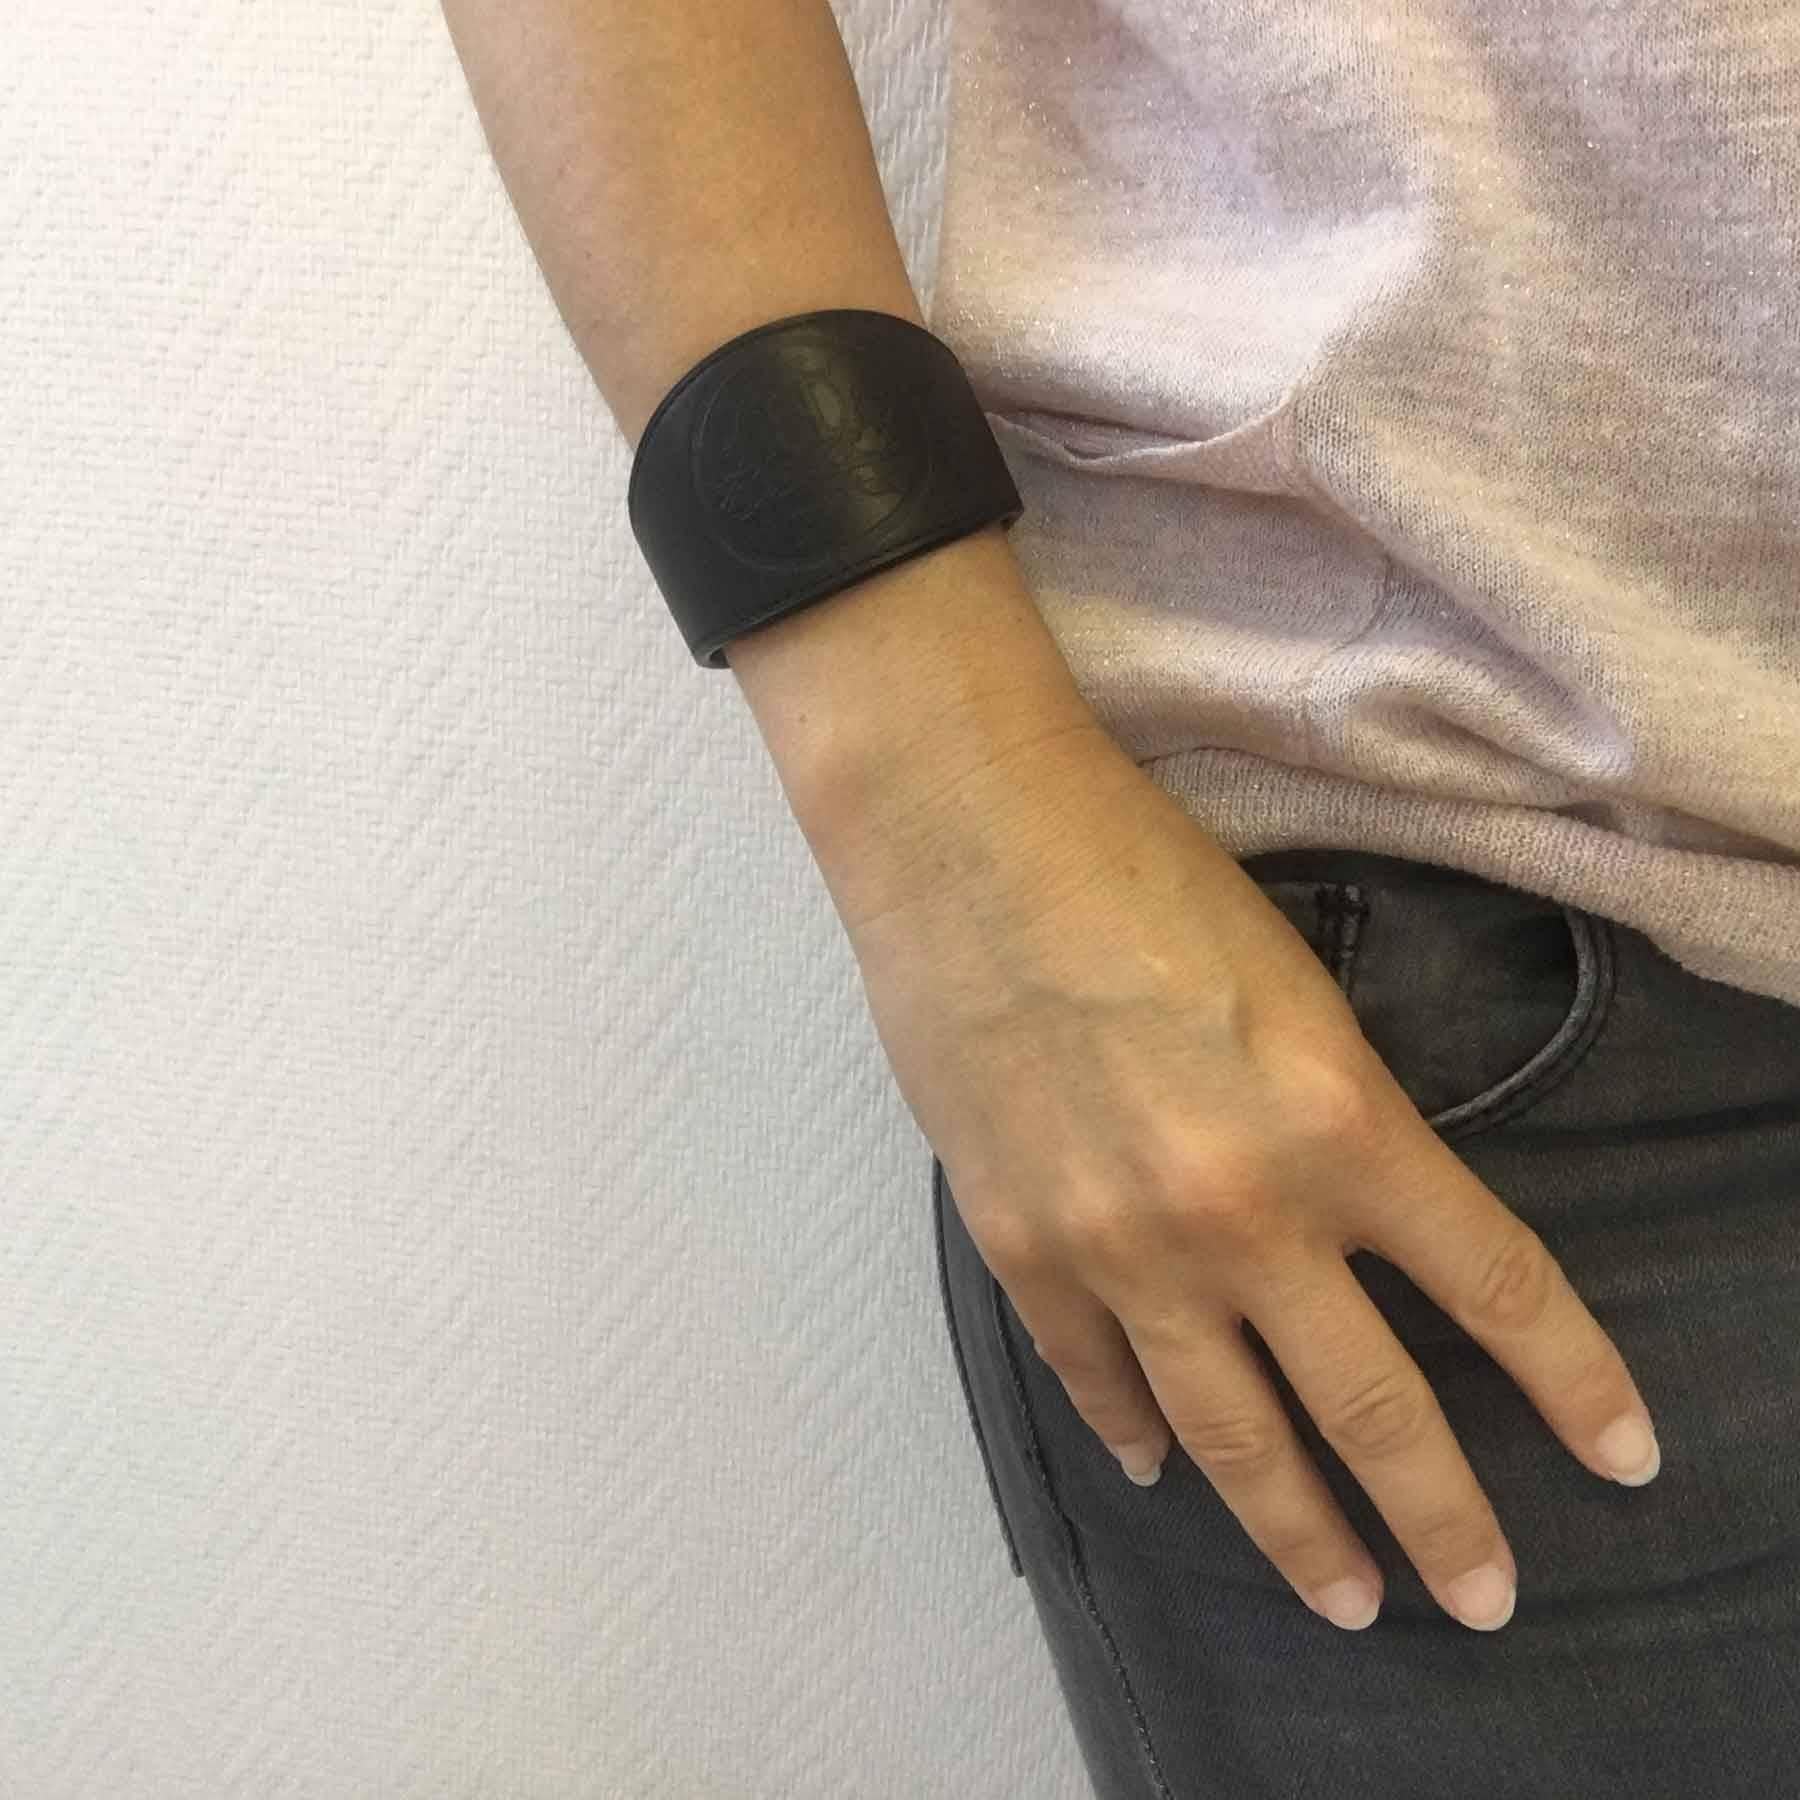 Hermès bracelet in very dark brown leather (close to black). Non-adjustable. It closes with a snap in silver metal.

It is a size M (medium), stamp K in a square 2007 year. New condition.

Dimensions : wrist circumference: 16.5 cm, width (at the